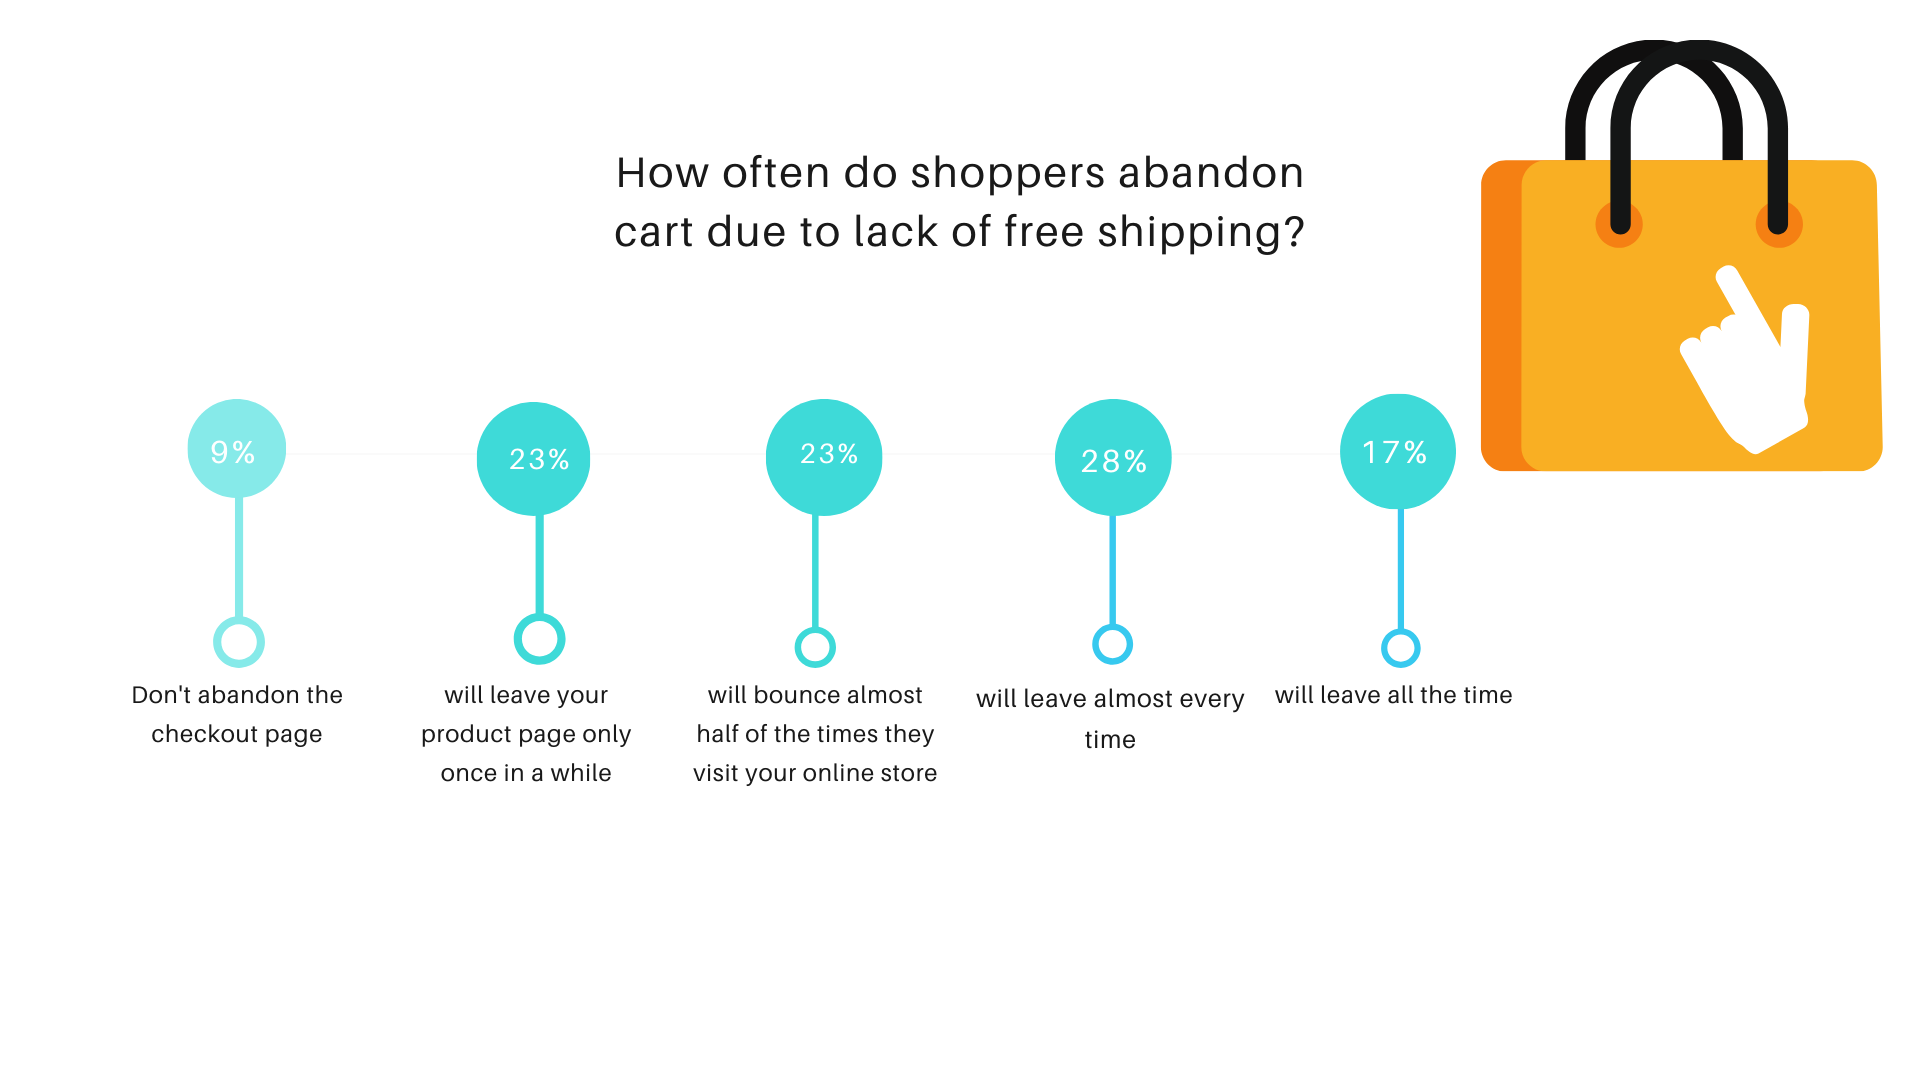 How often do shoppers abandon cart due to lack of free shipping